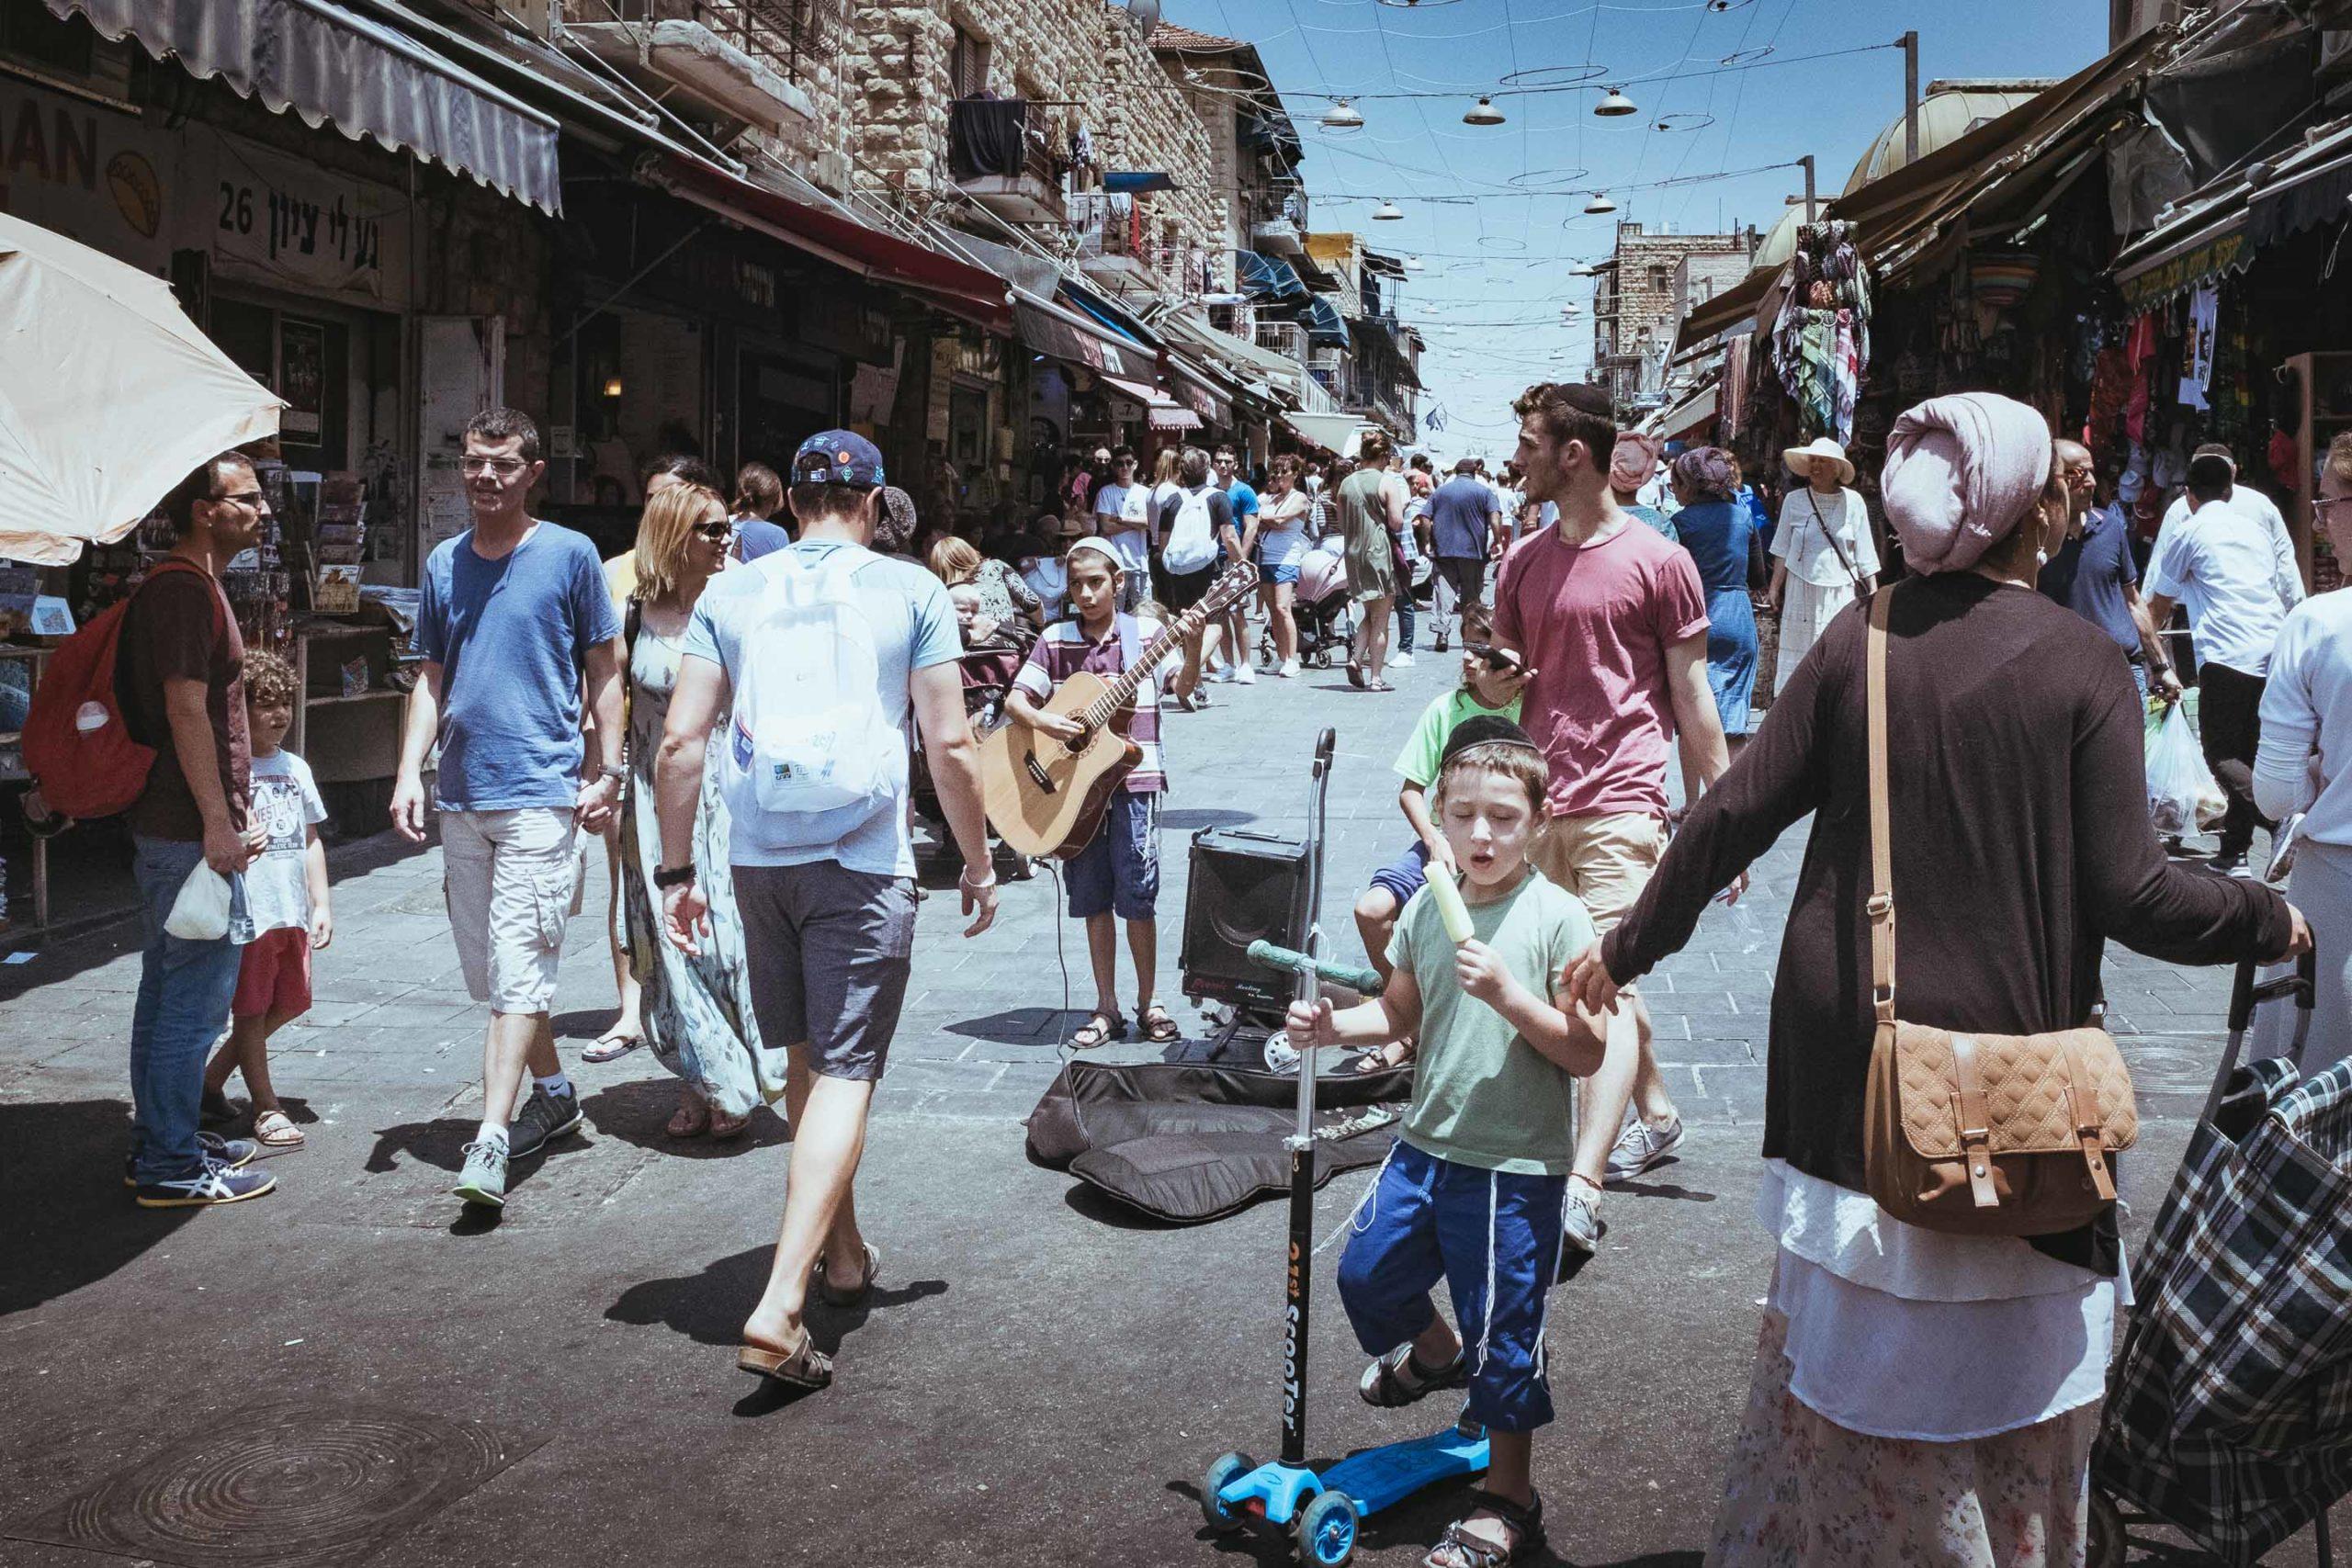 This image shows one of a series of photos taken at Mahane Yehuda Market in Jerusalem.